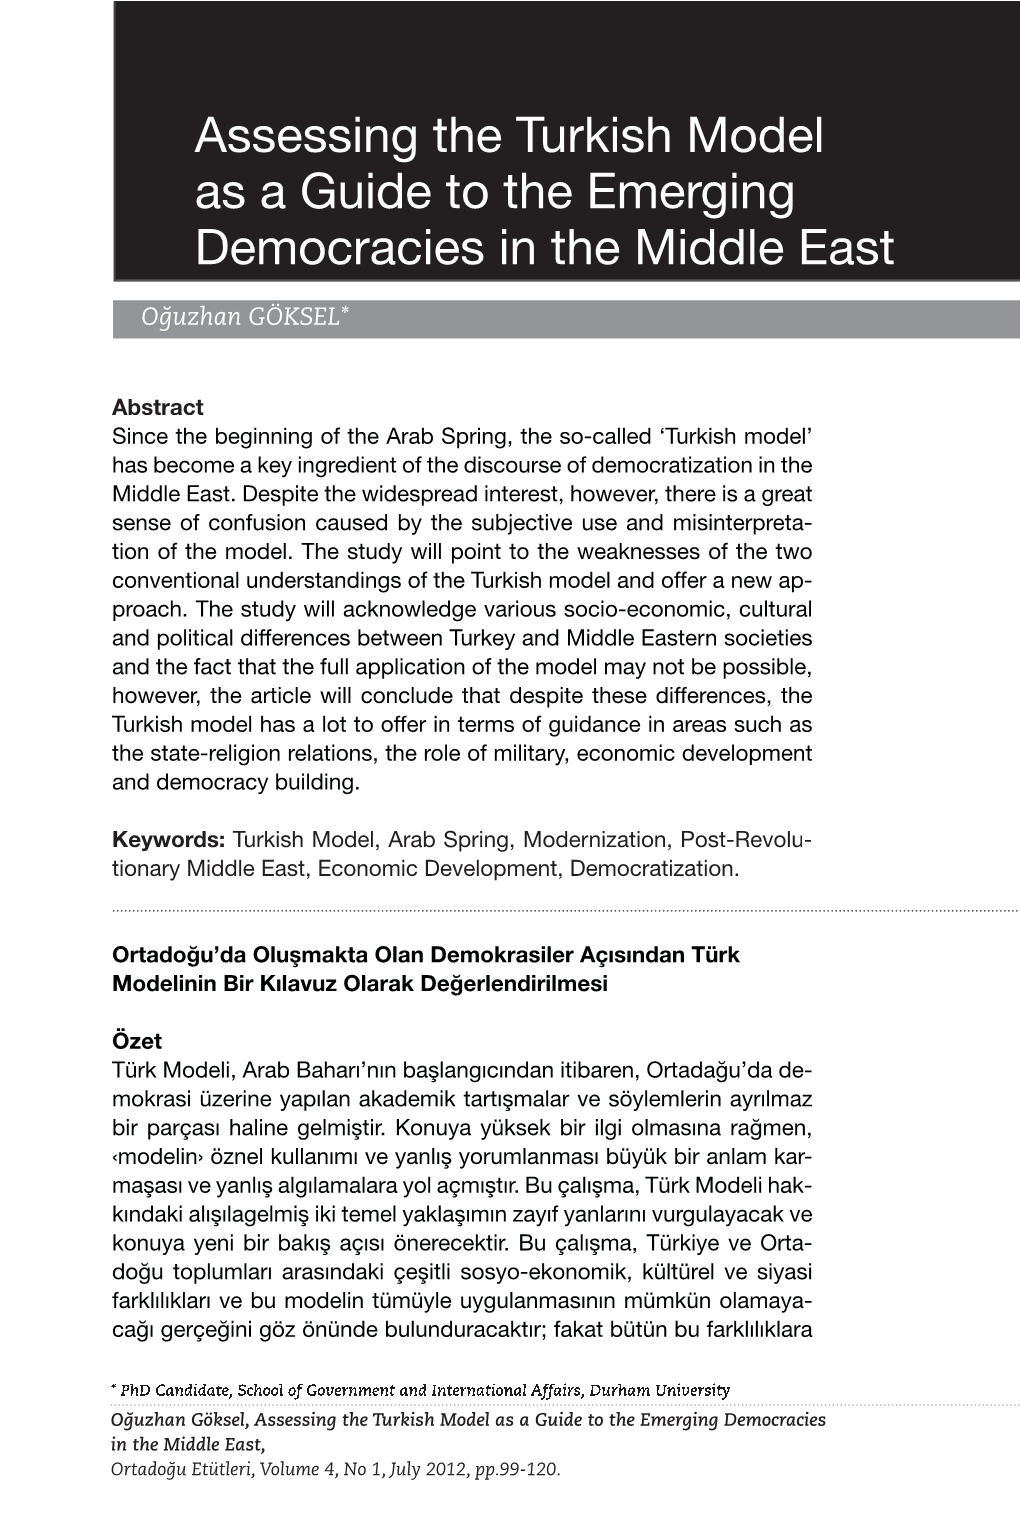 Assessing the Turkish Model As a Guide to the Emerging Democracies in the Middle East